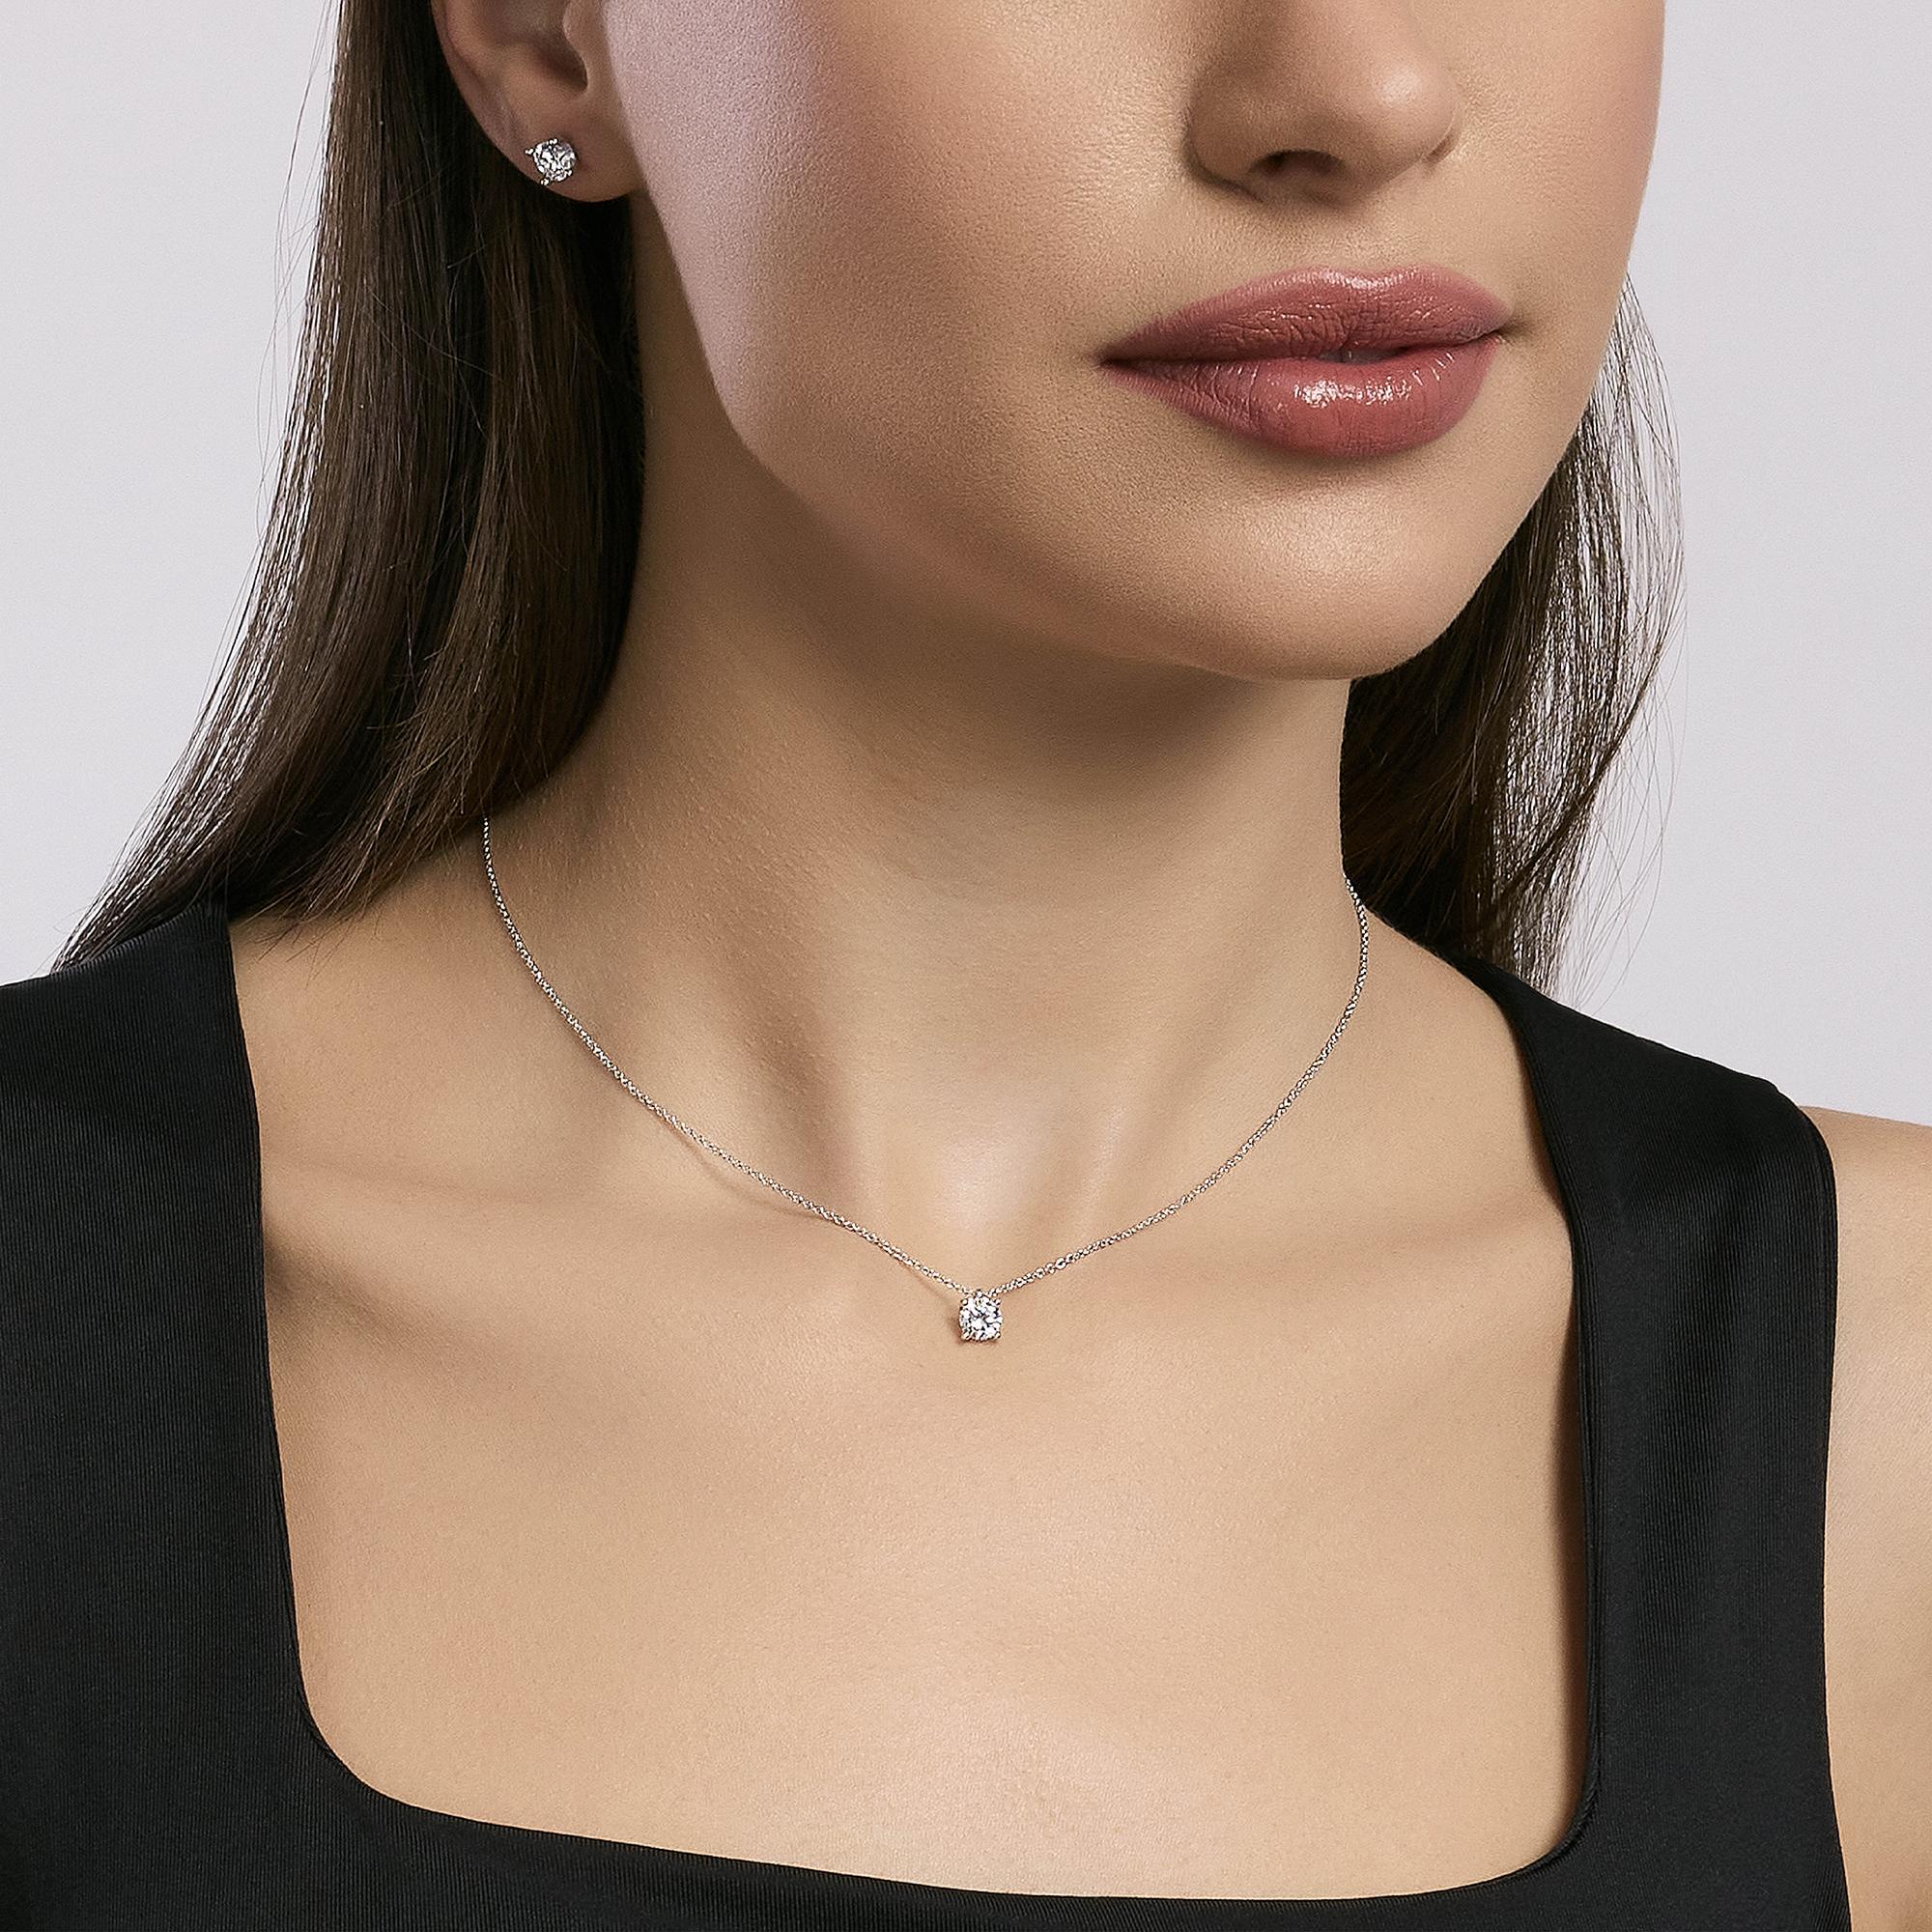 Mabina Woman - Silver choker with forced chain and SHINY light point - 553550